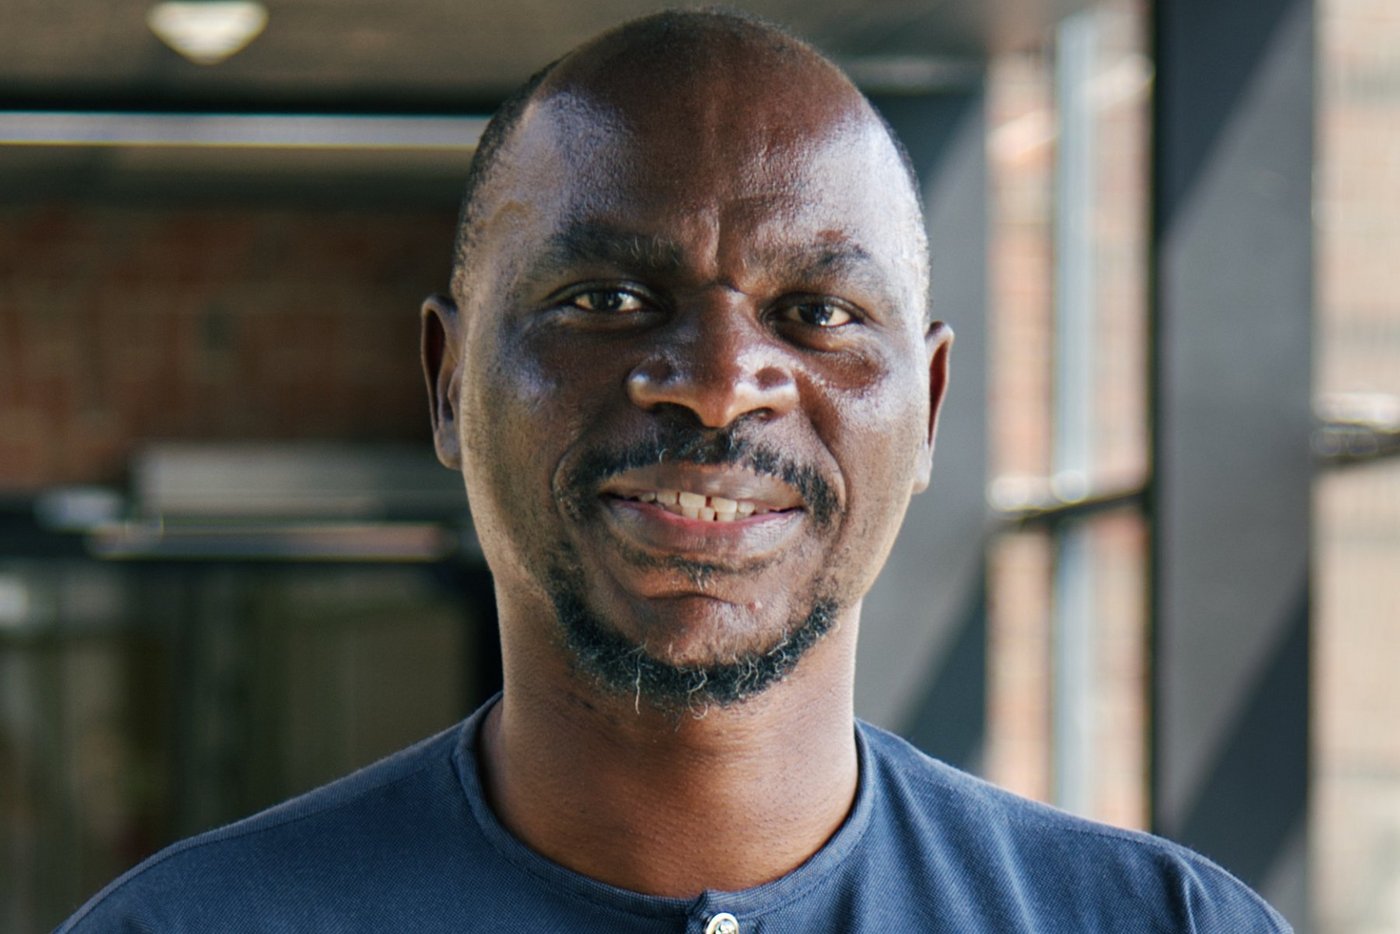 Portrait photo of Gabonese researcher Ghyslain Mombo-Ngoma: He is bald, has a short full beard and wears a dark blue African shirt and smiles at the camera.